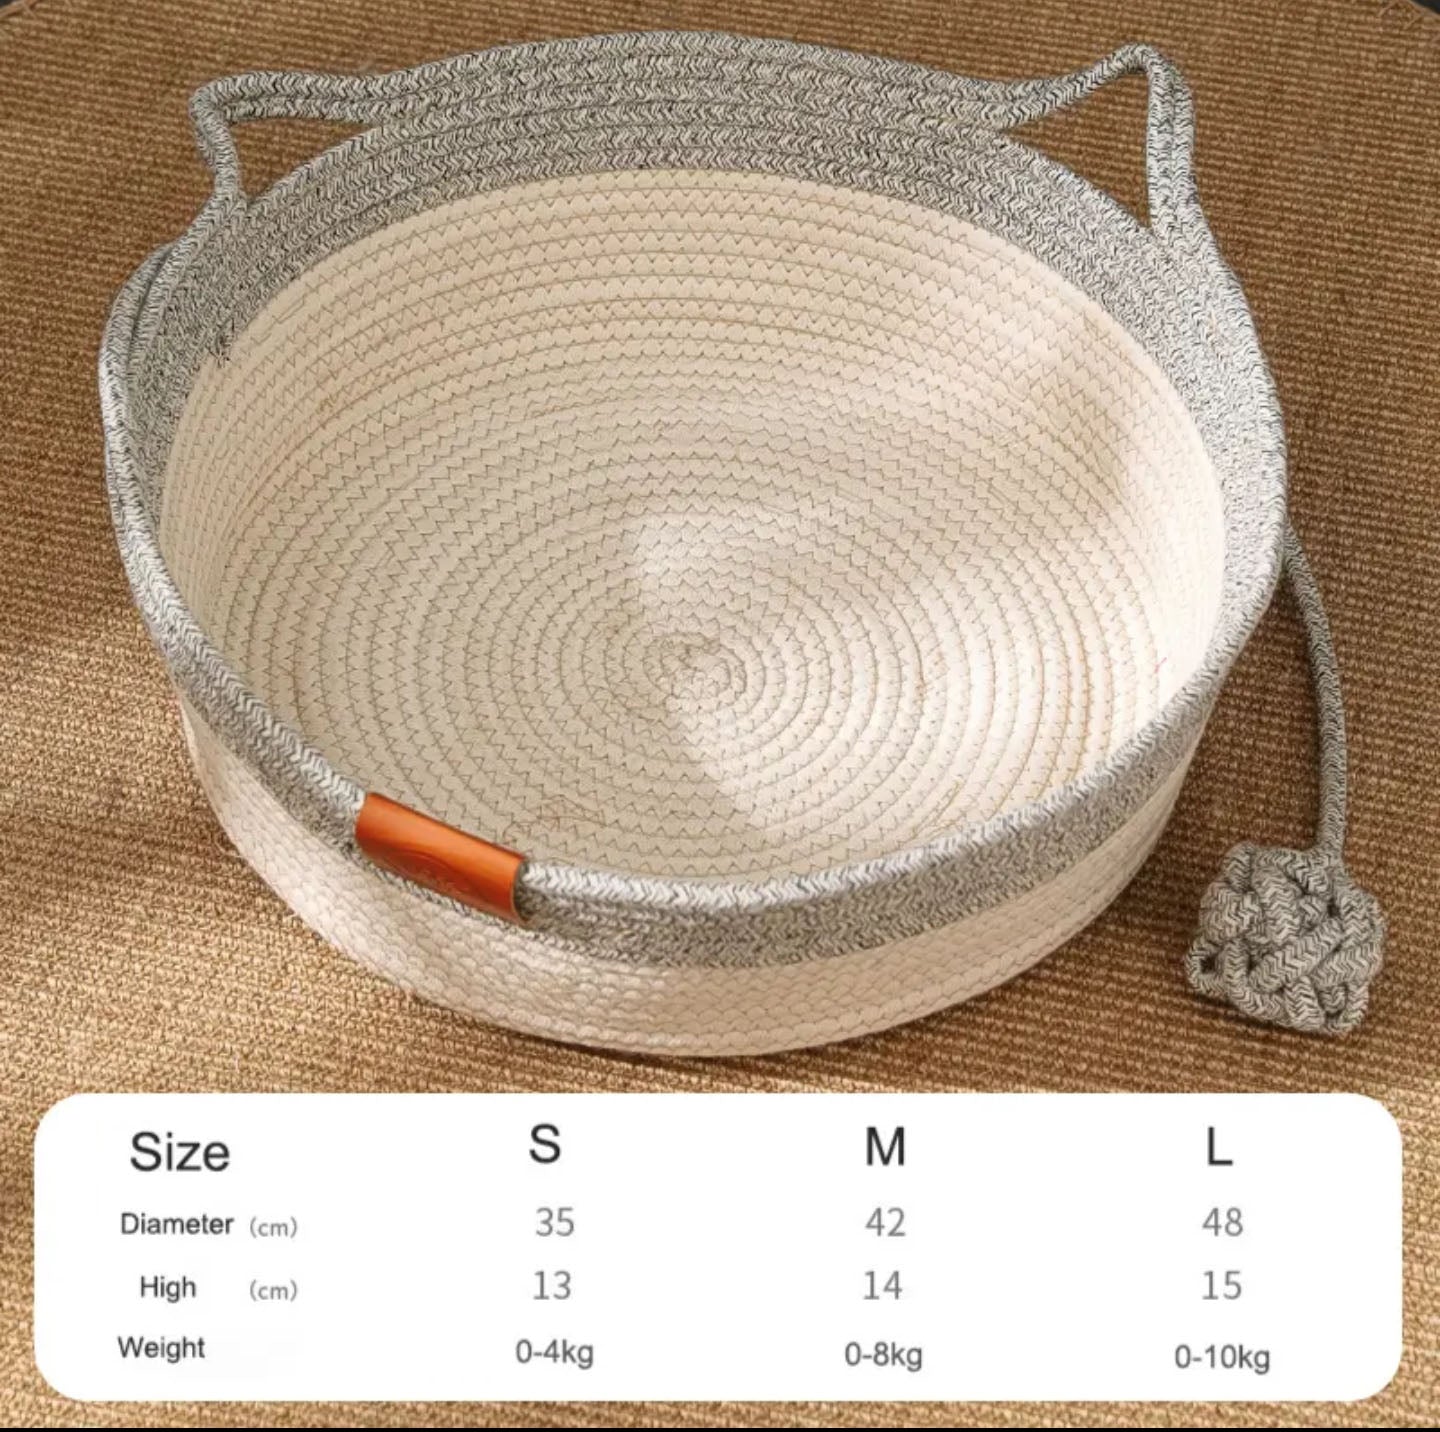 Handwoven Cotton Rope Cat Bed